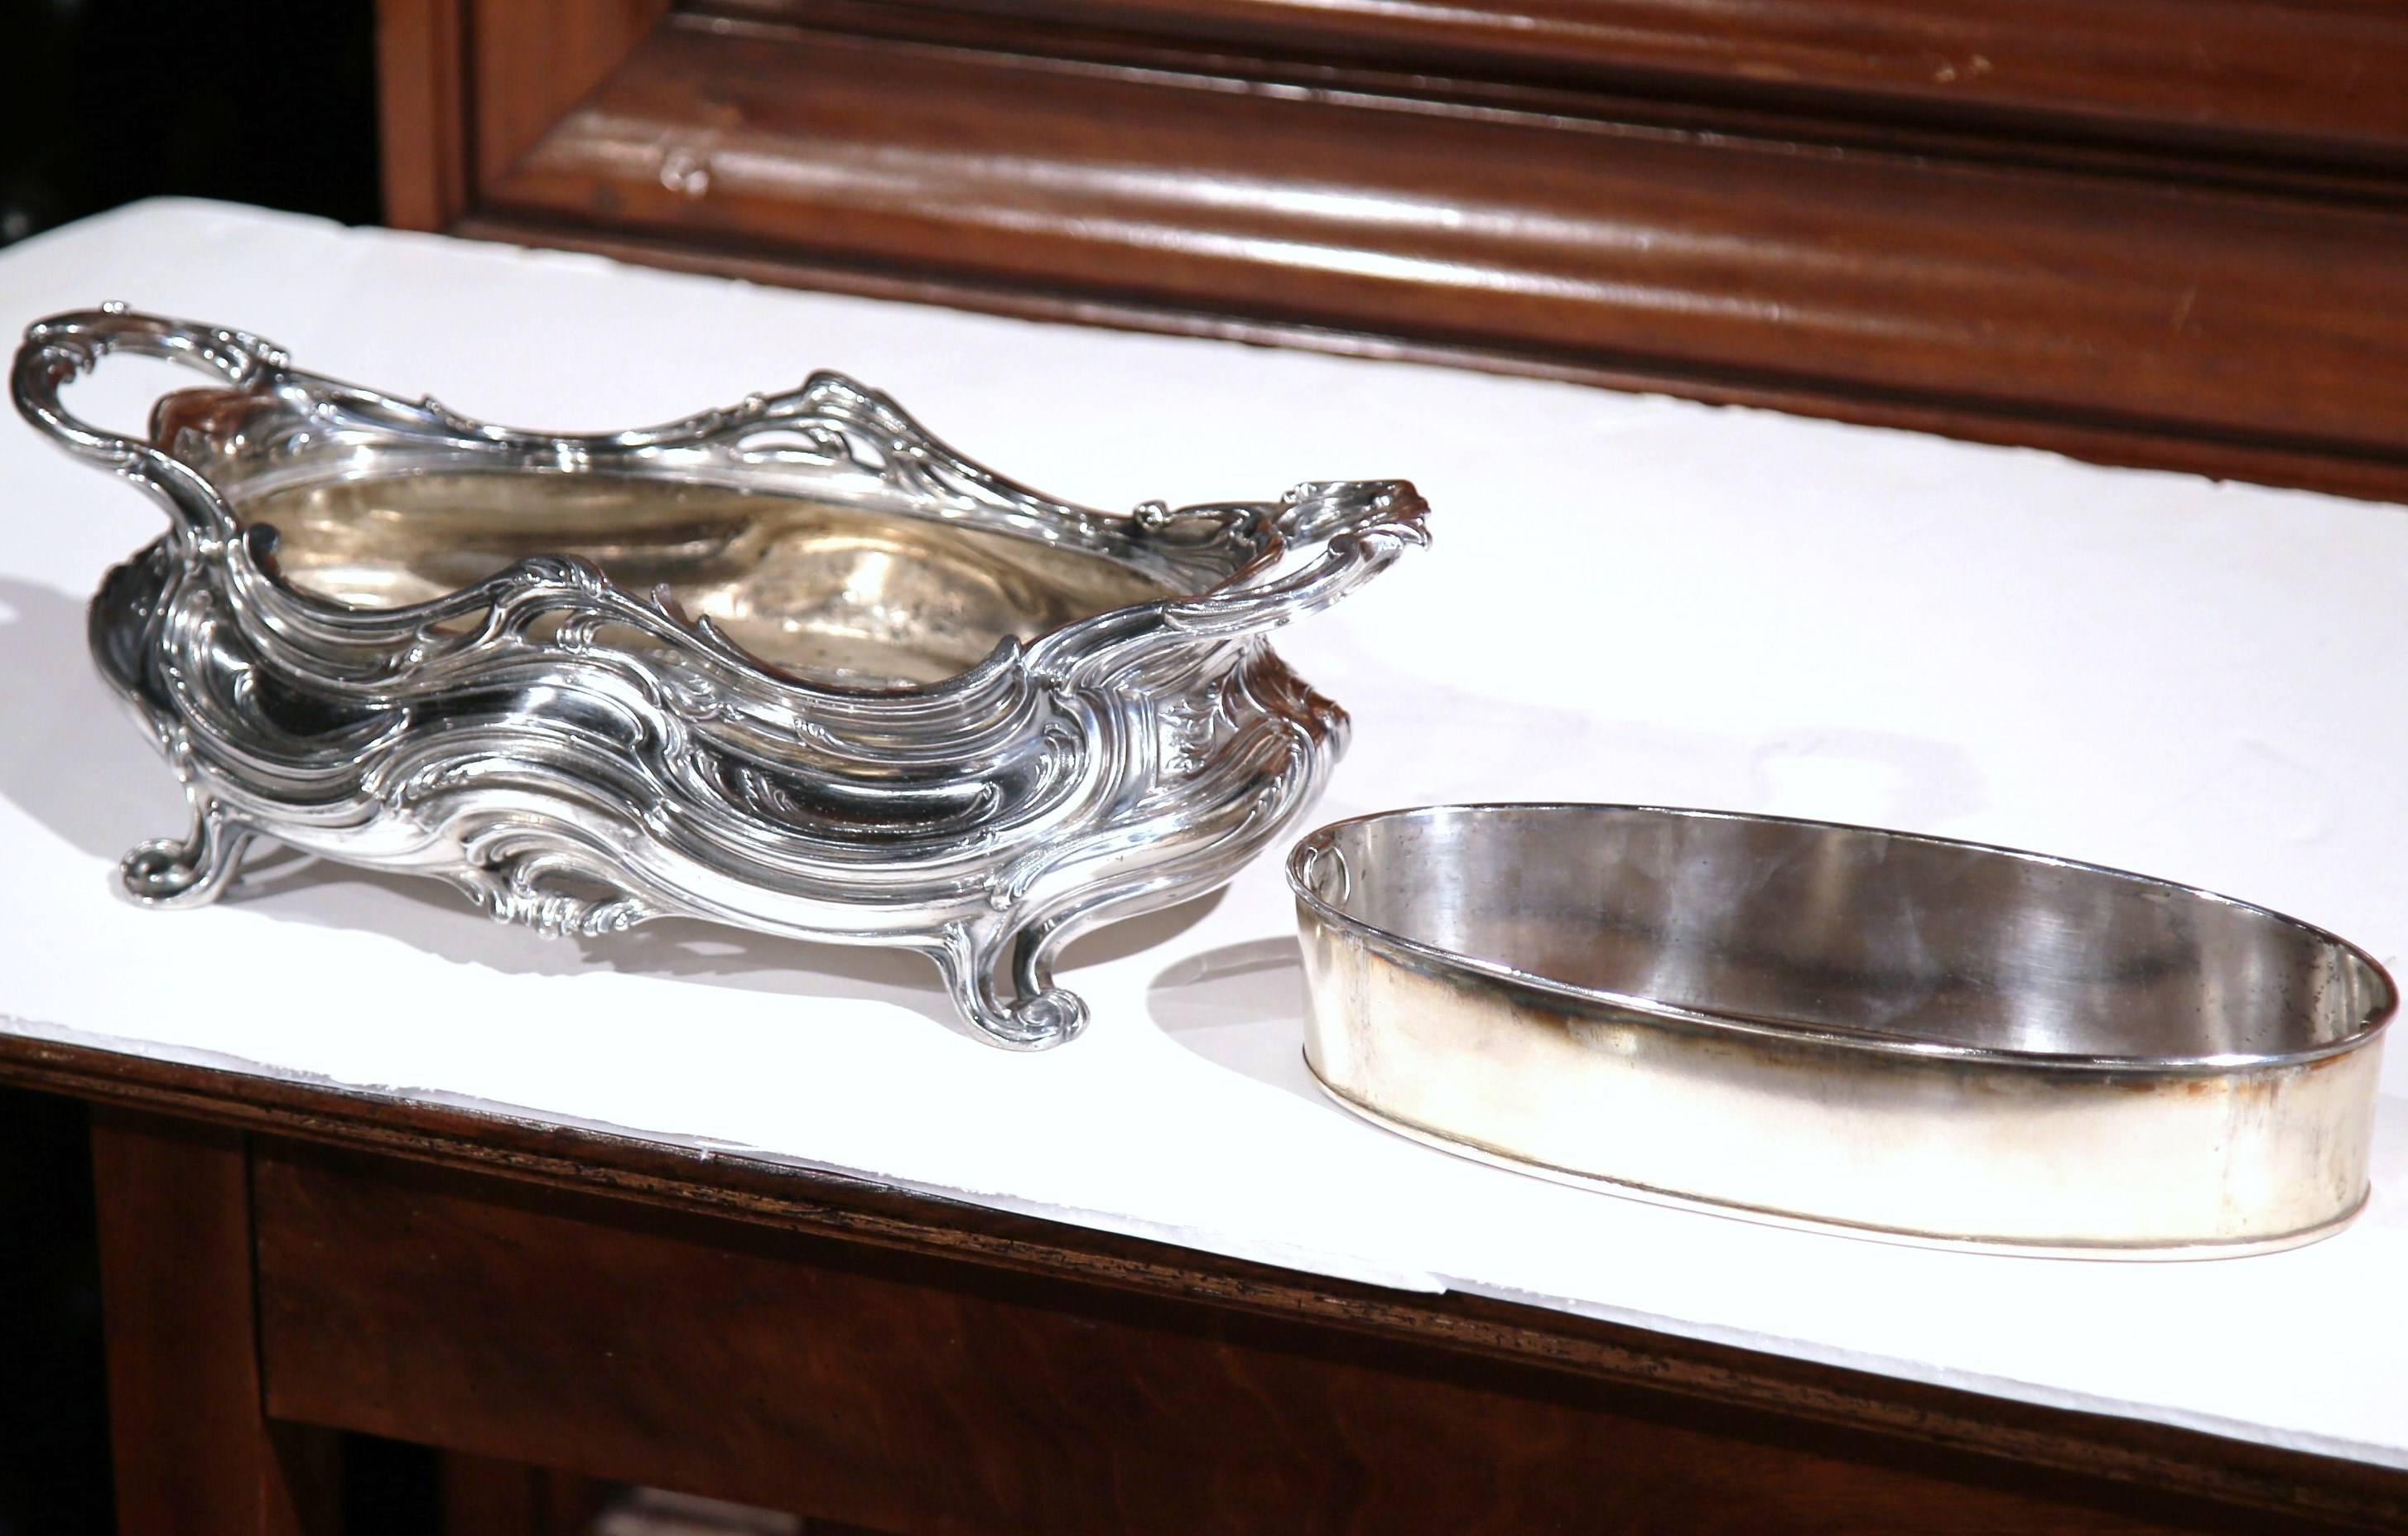 19th Century French Louis XV Silver Plated over Pewter Jardinière (Louis XV.)